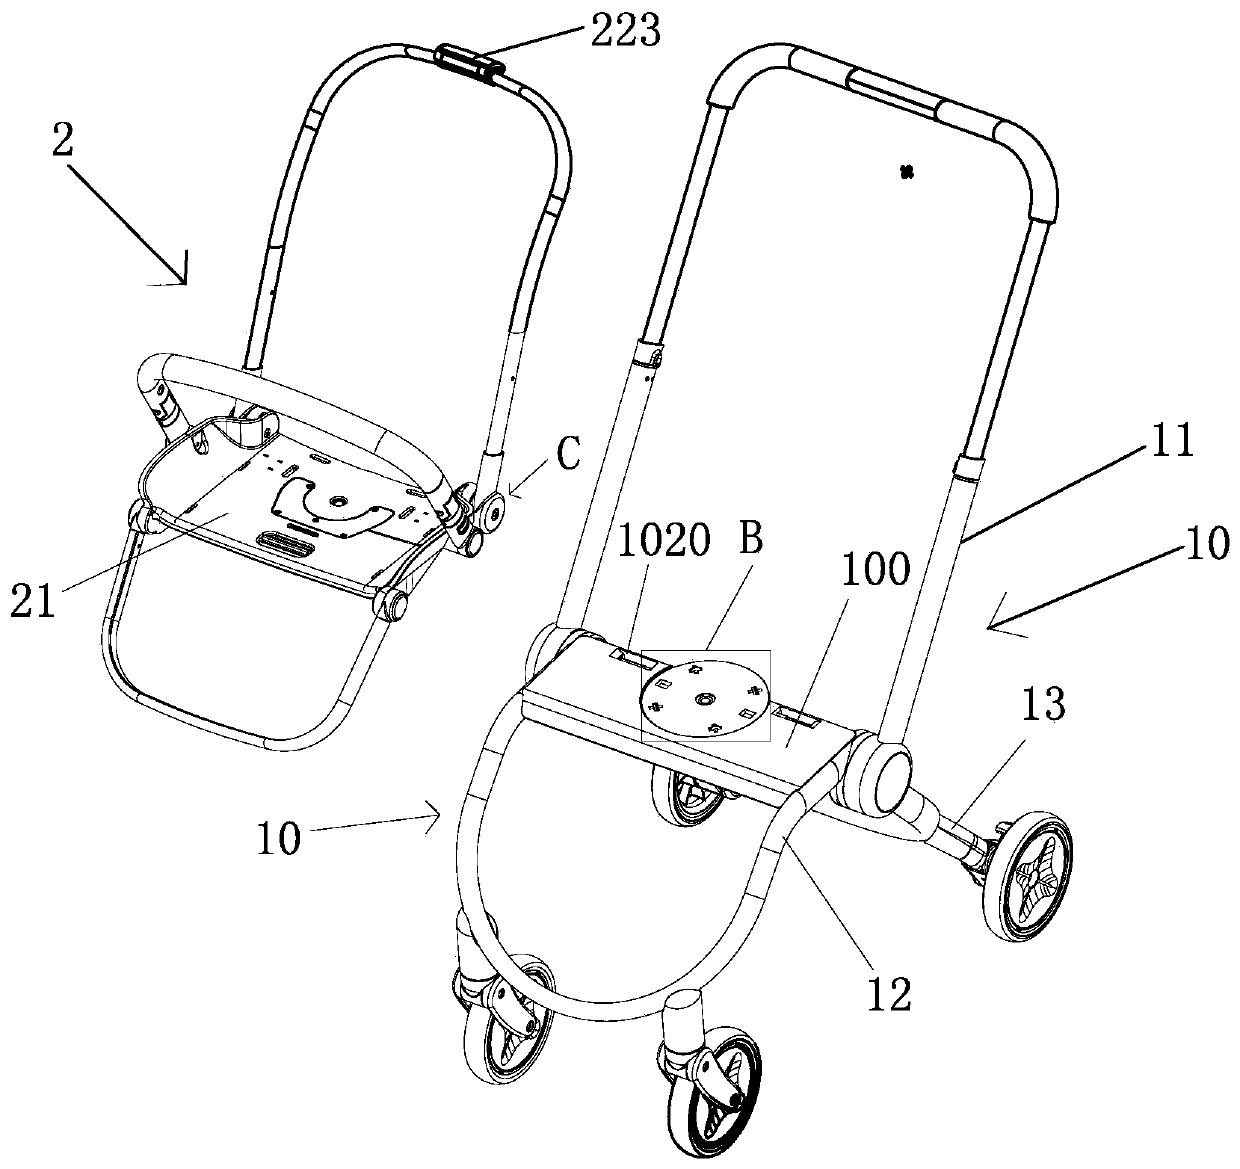 Baby carriage with seat and back capable of being folded in linkage manner